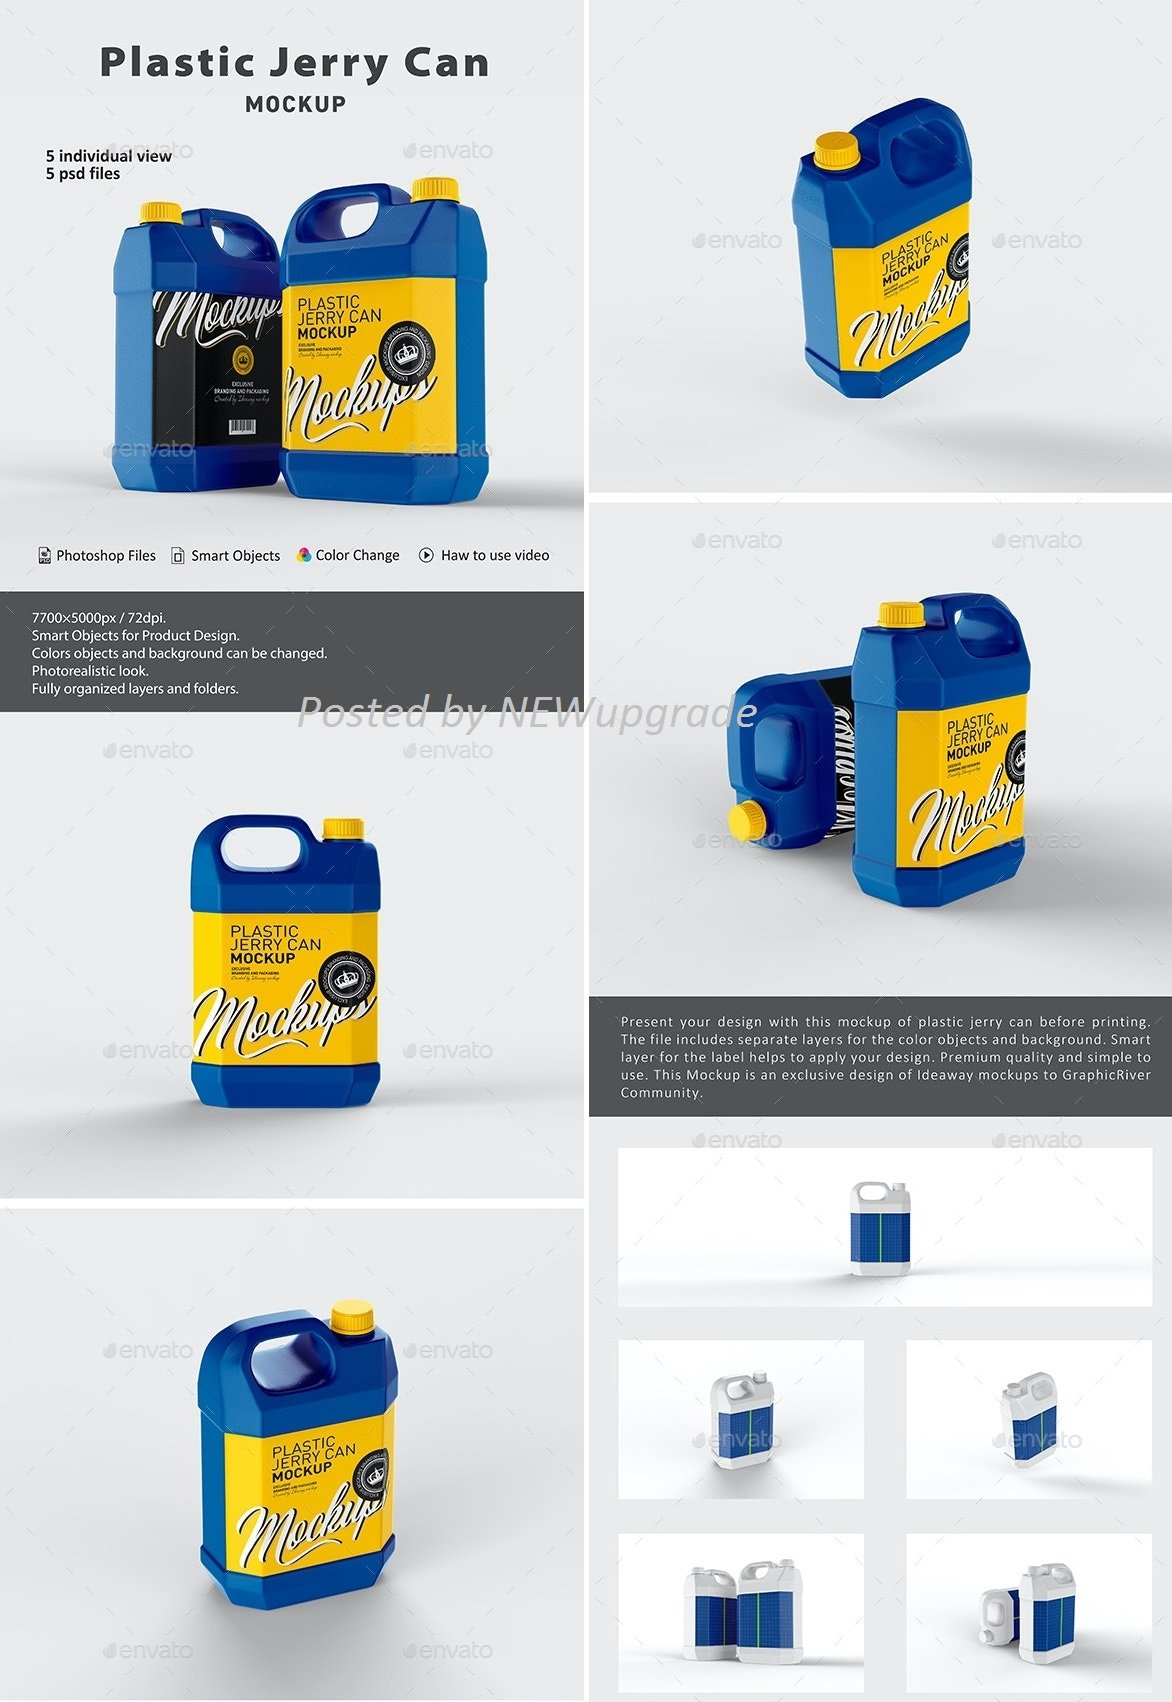 Download Download Graphicriver Plastic Jerry Can Mockup 26561750 Softarchive